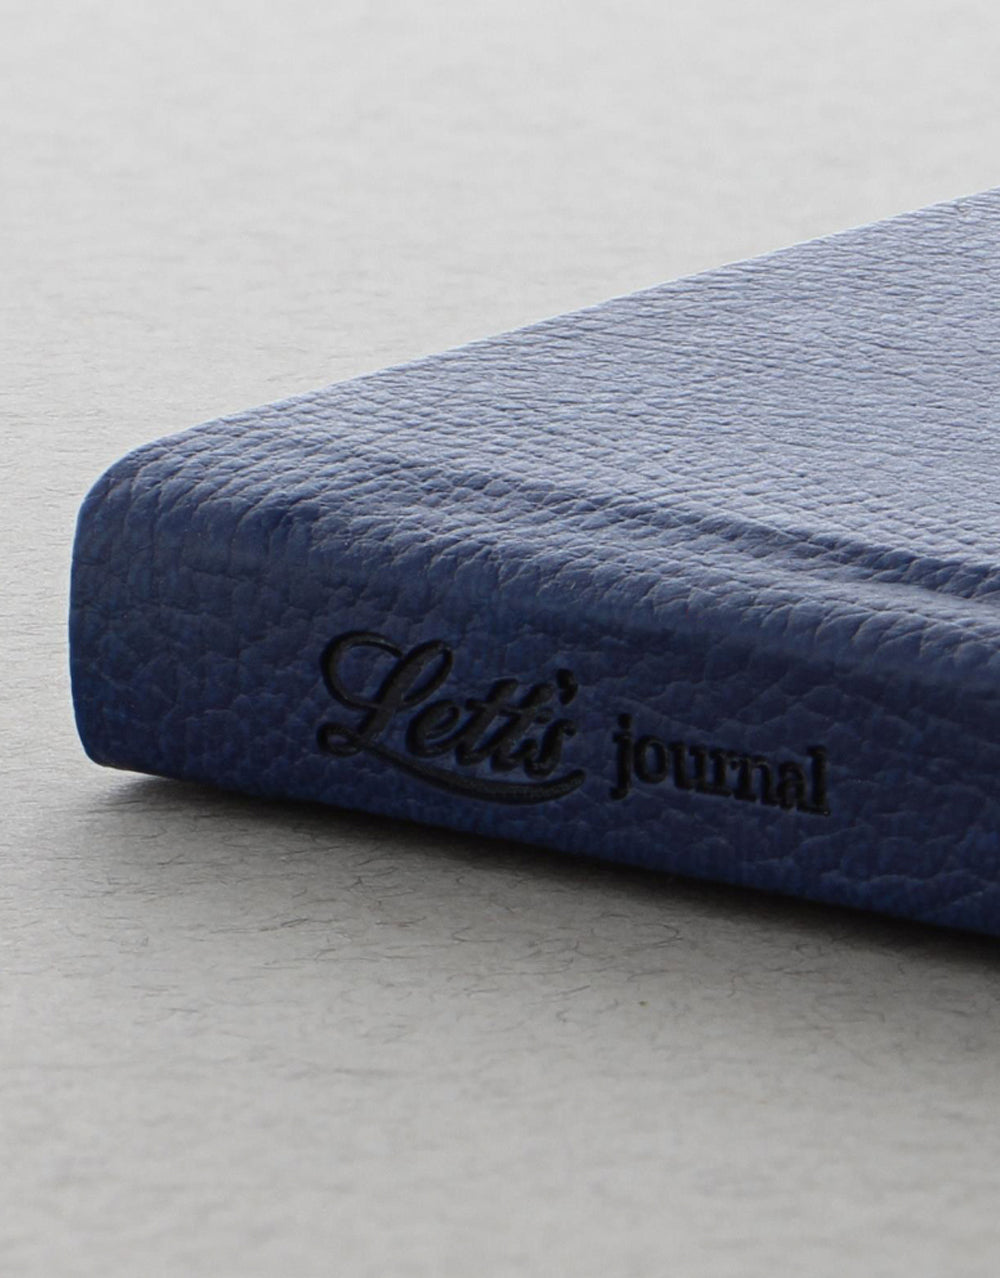 Origins Book Dotted Notebook Navy#colour_navy